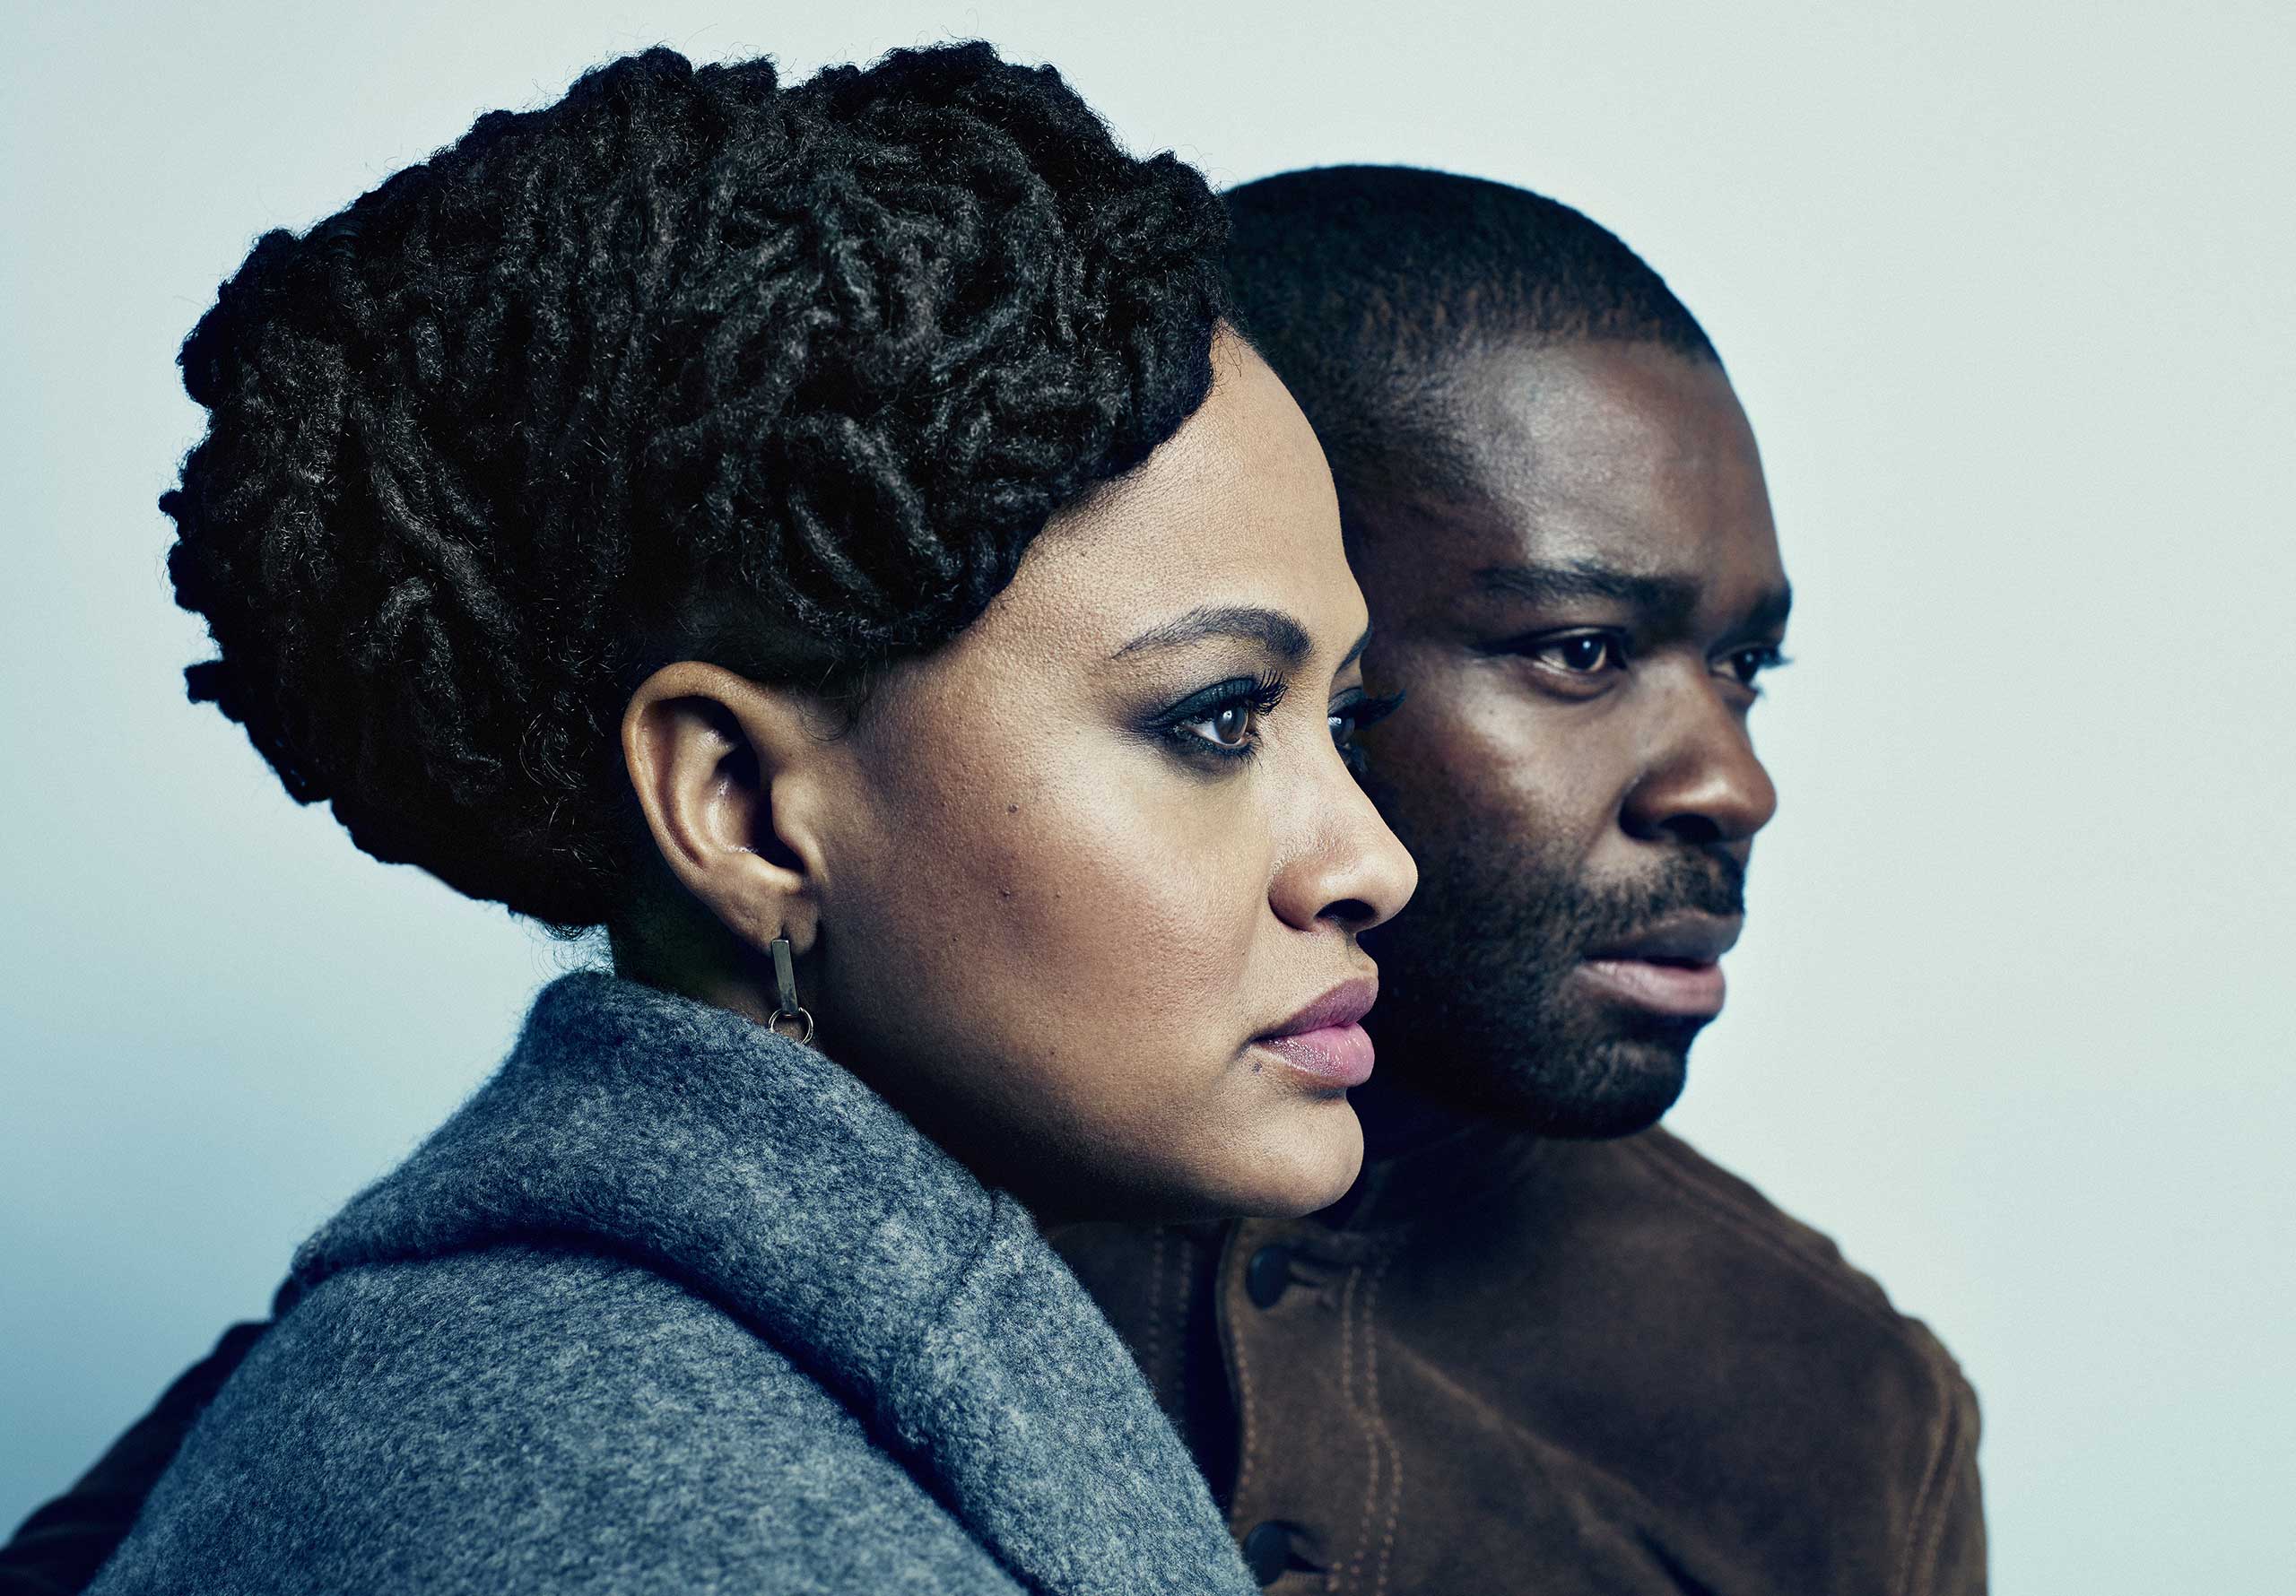 Selma Director Ava DuVernay and actor David Oyelowo photographed in New York City. From  Making Selma History.  January 19, 2014 issue.